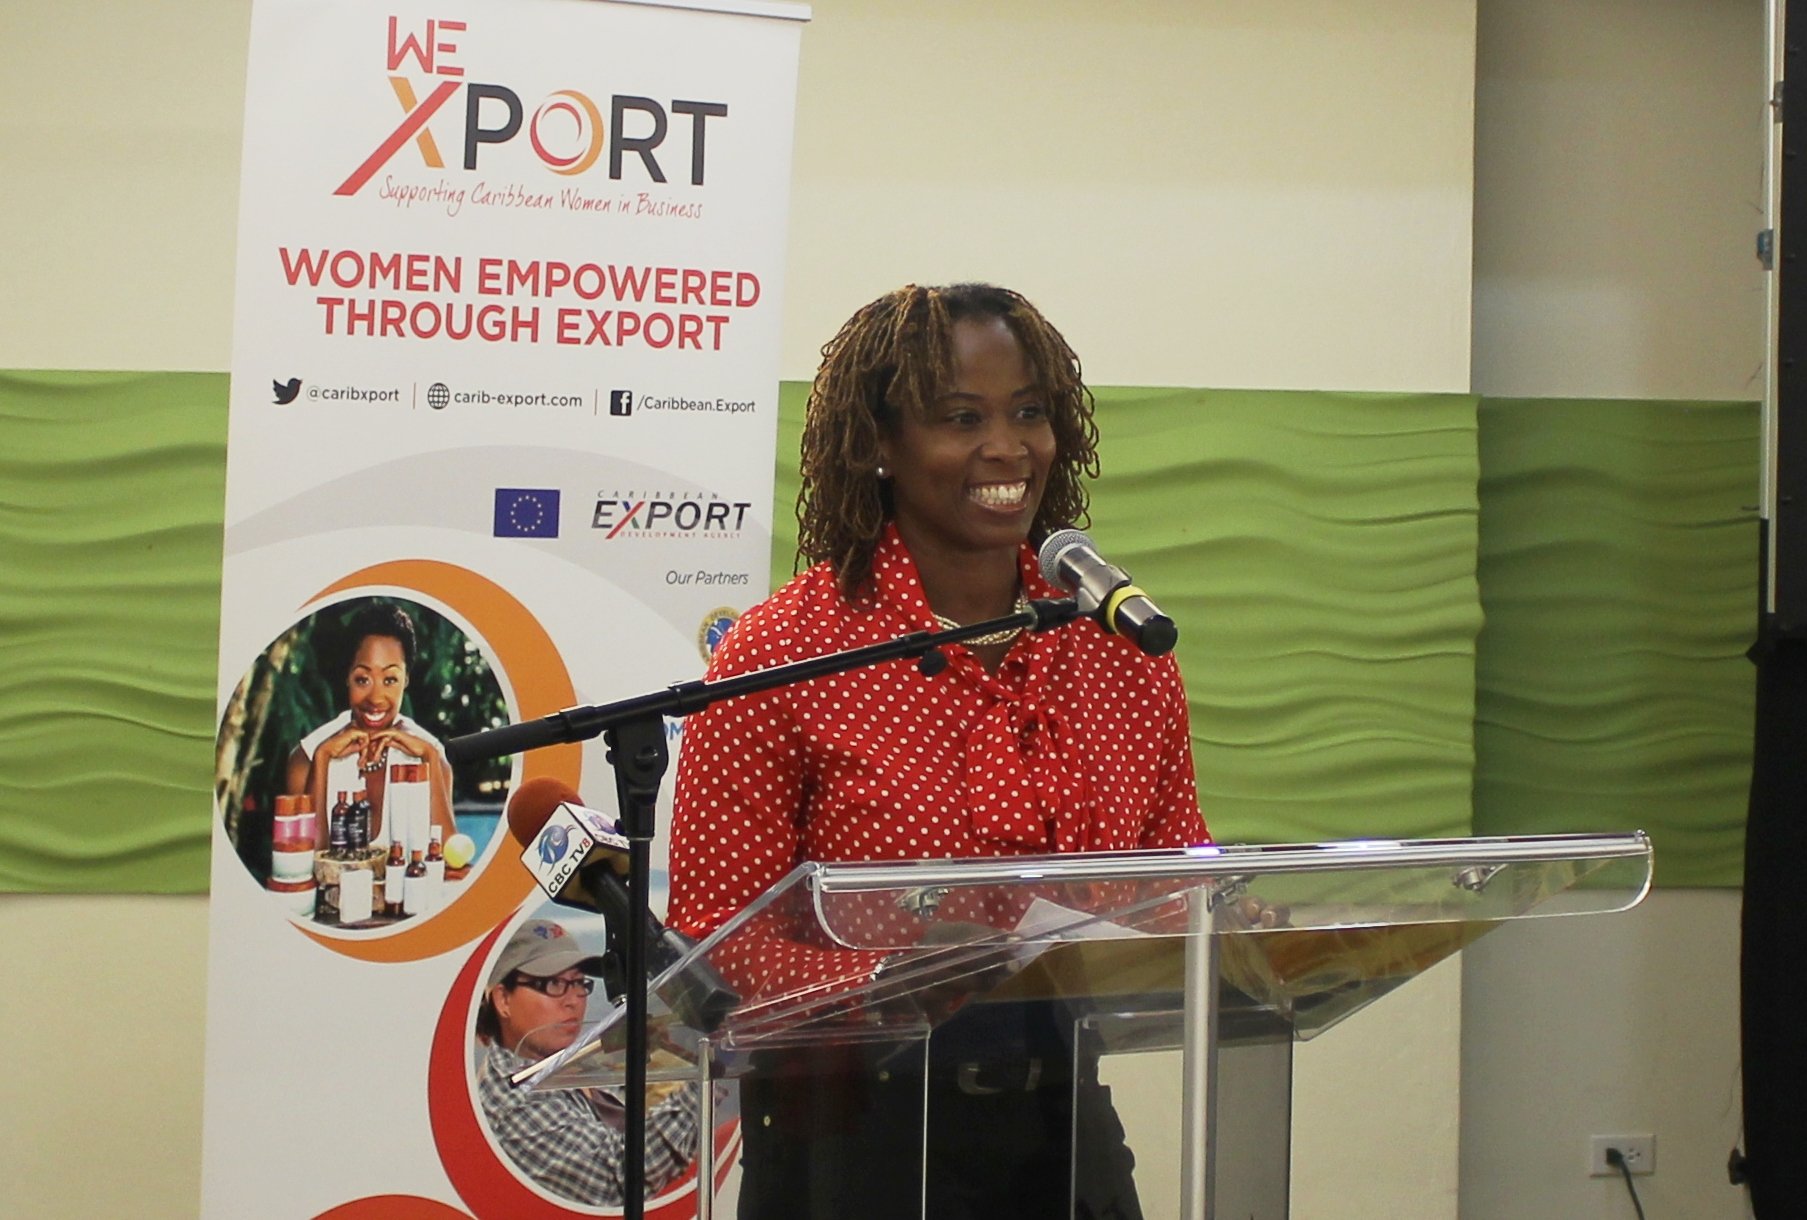 Lisa Harding, Micro, Small and Medium Enterprise Development Coordinator, Technical Cooperation Division, CDB believes the lack of access to finance experienced by women entrepreneurs in the Caribbean stymies not only their development, but also Regional economic growth.